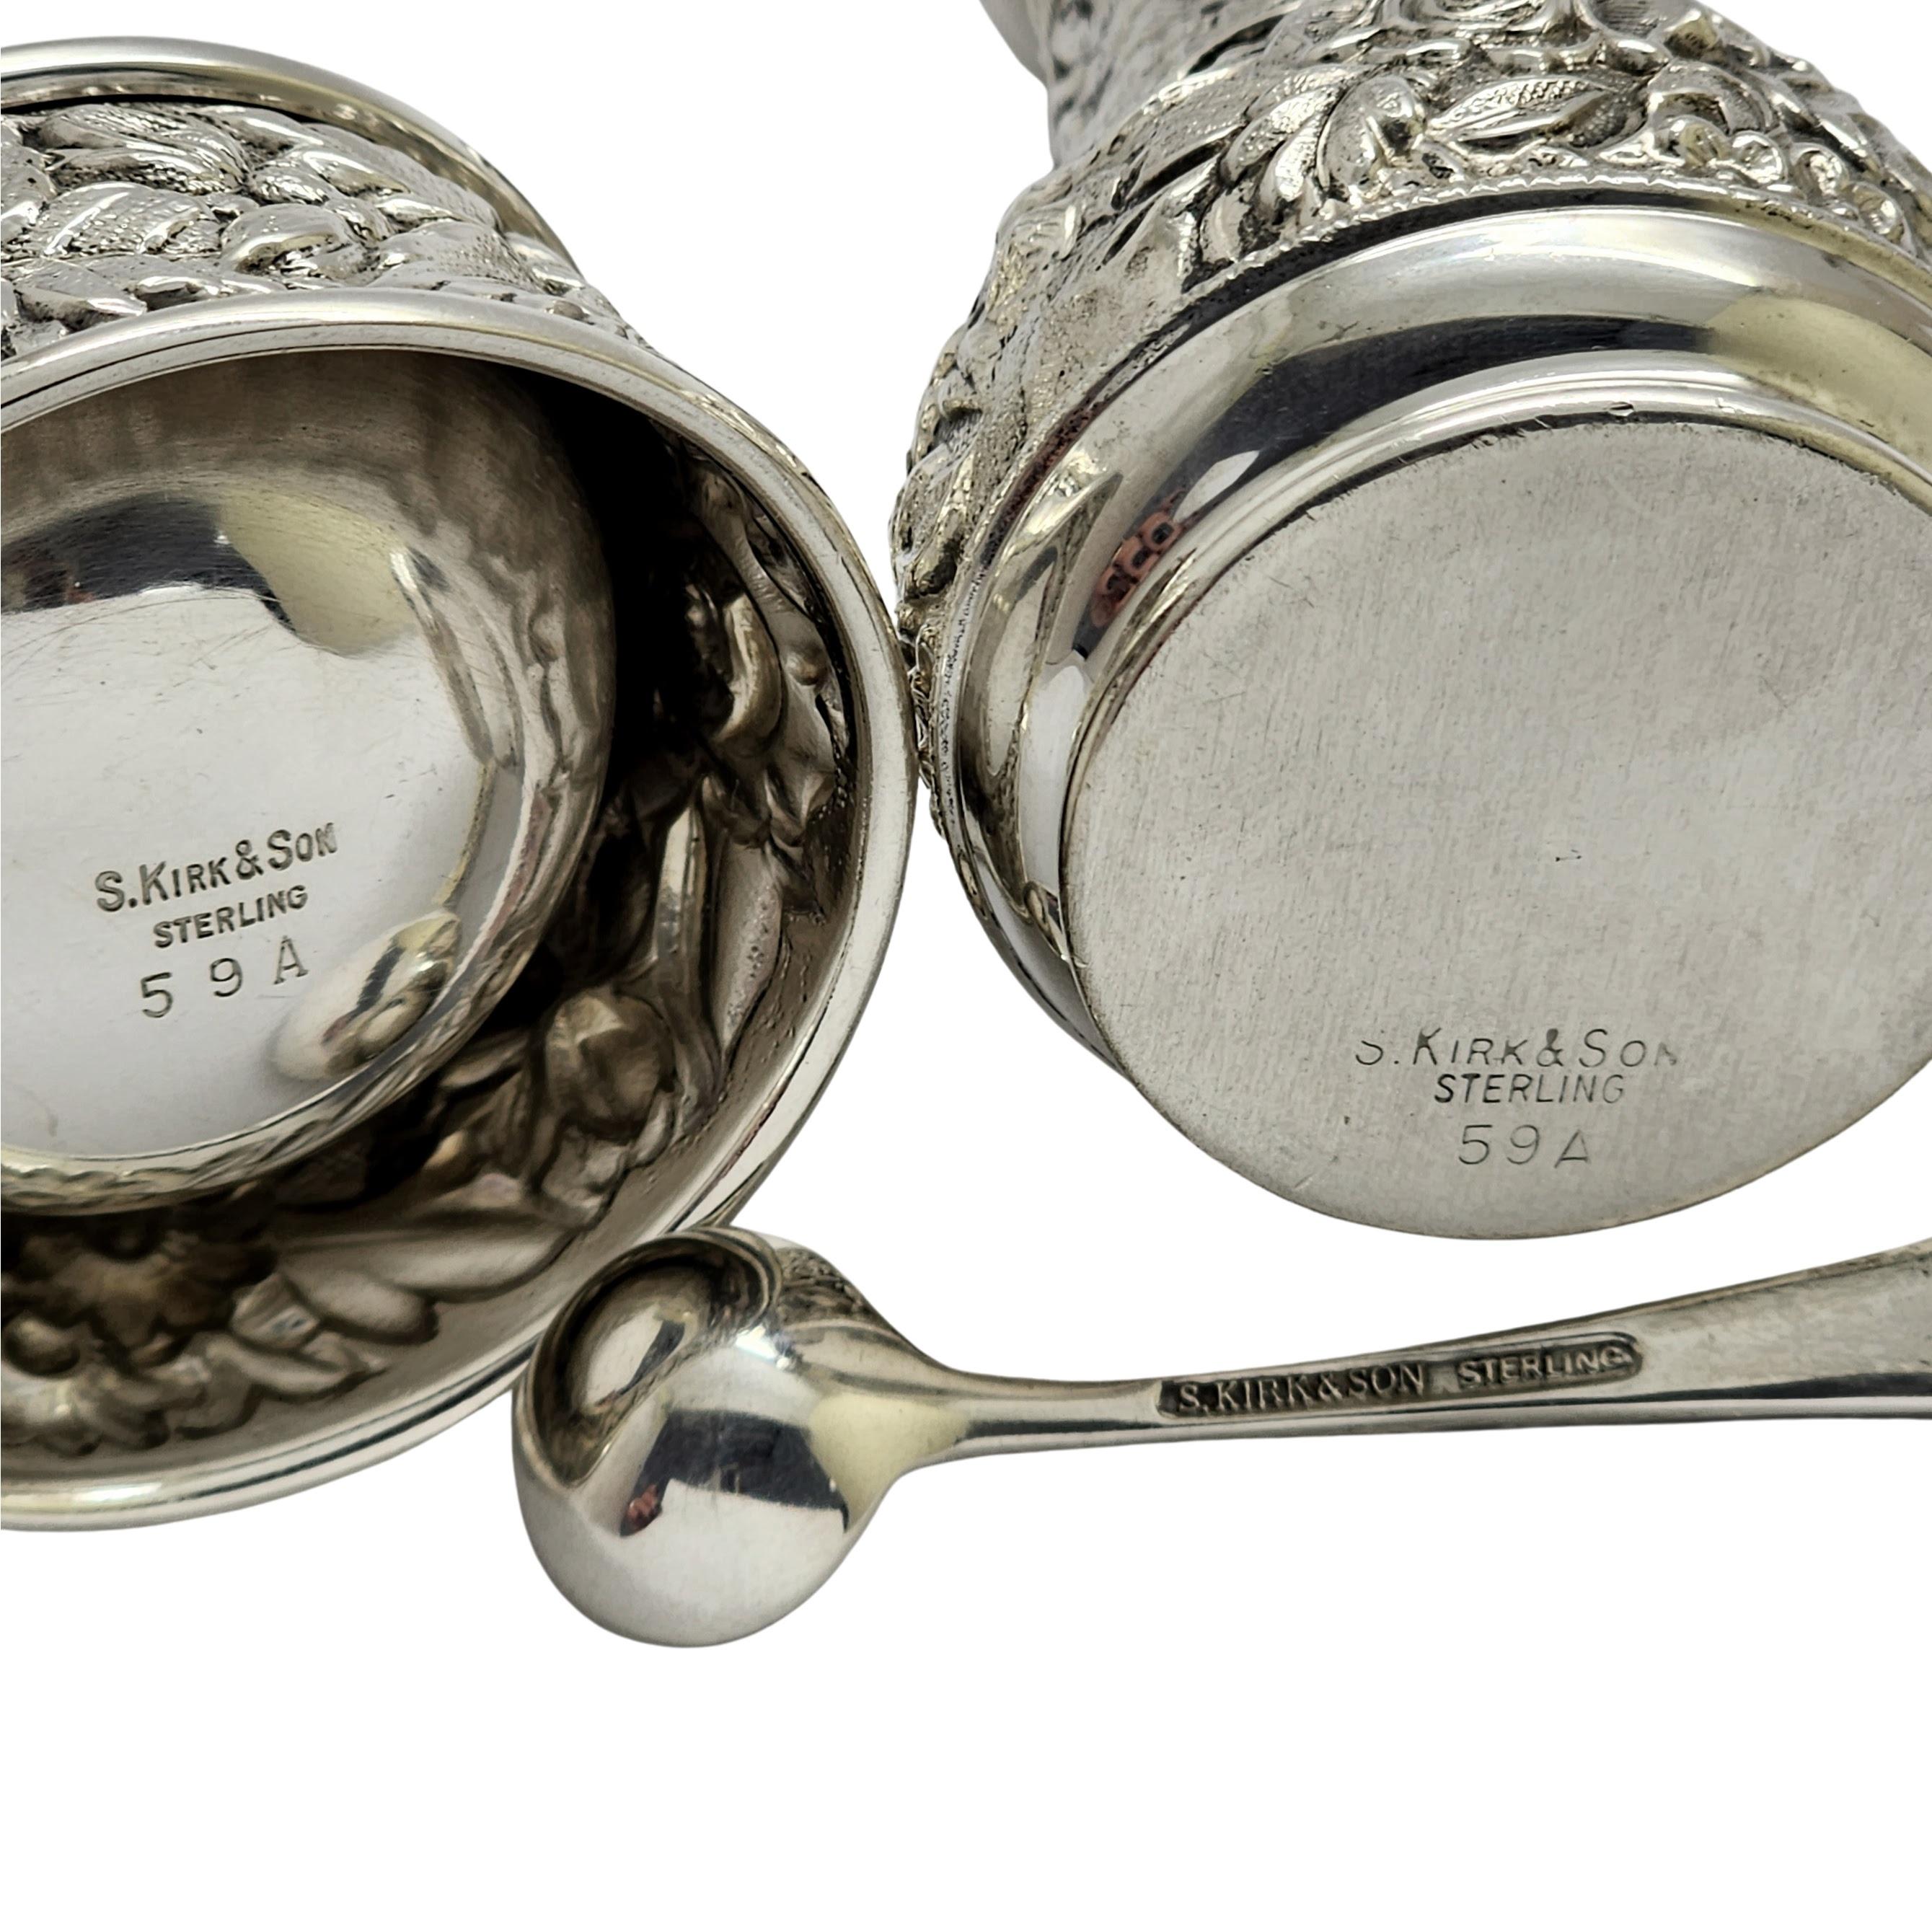 S Kirk & Son Sterling 59A Repousse Salt Cellar with Spoon and Pepper Shaker 1